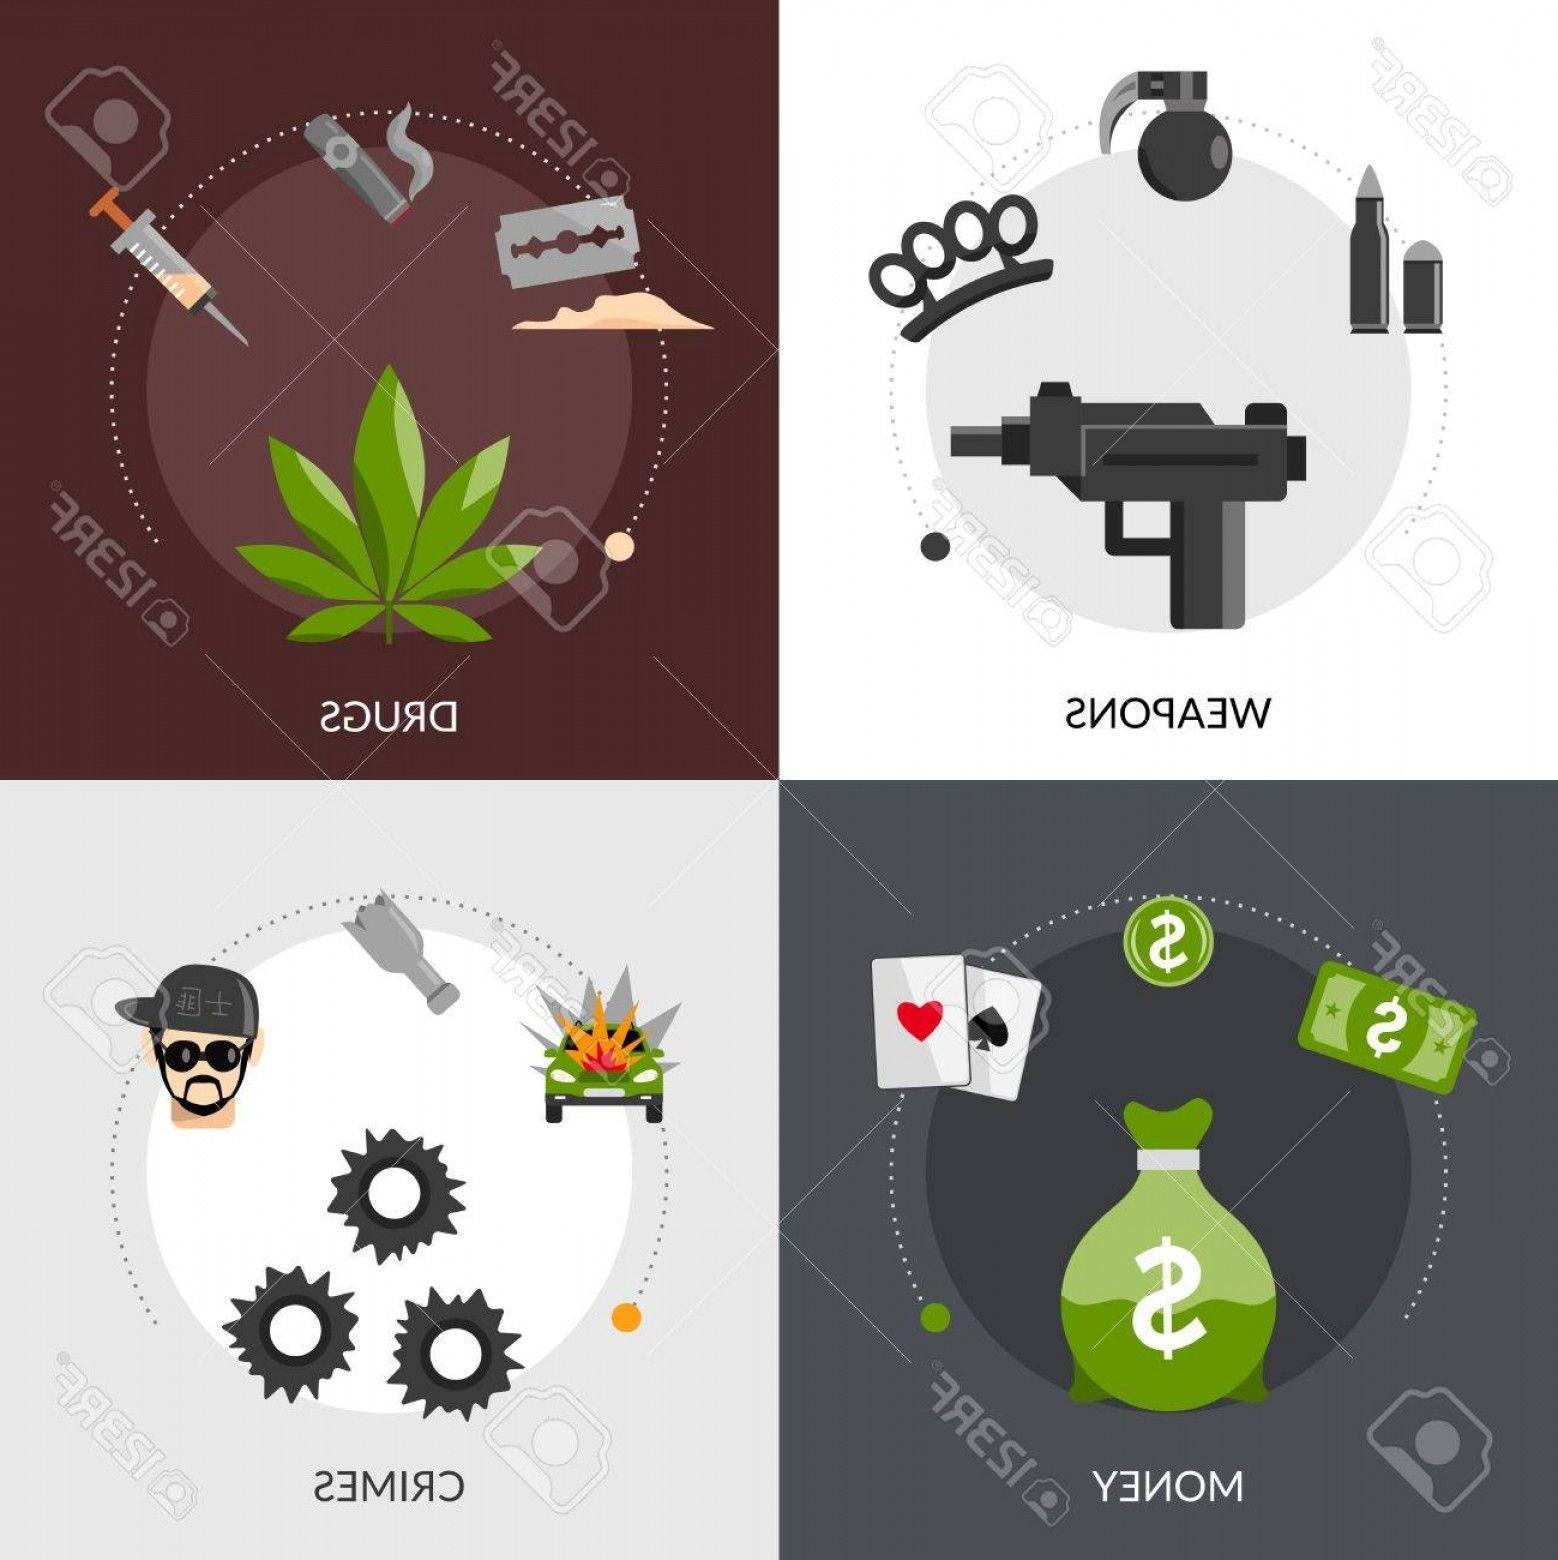 Gangster Money Logo - Photostock Vector Gangster Flat Icons Composition Of Weapons Drugs ...